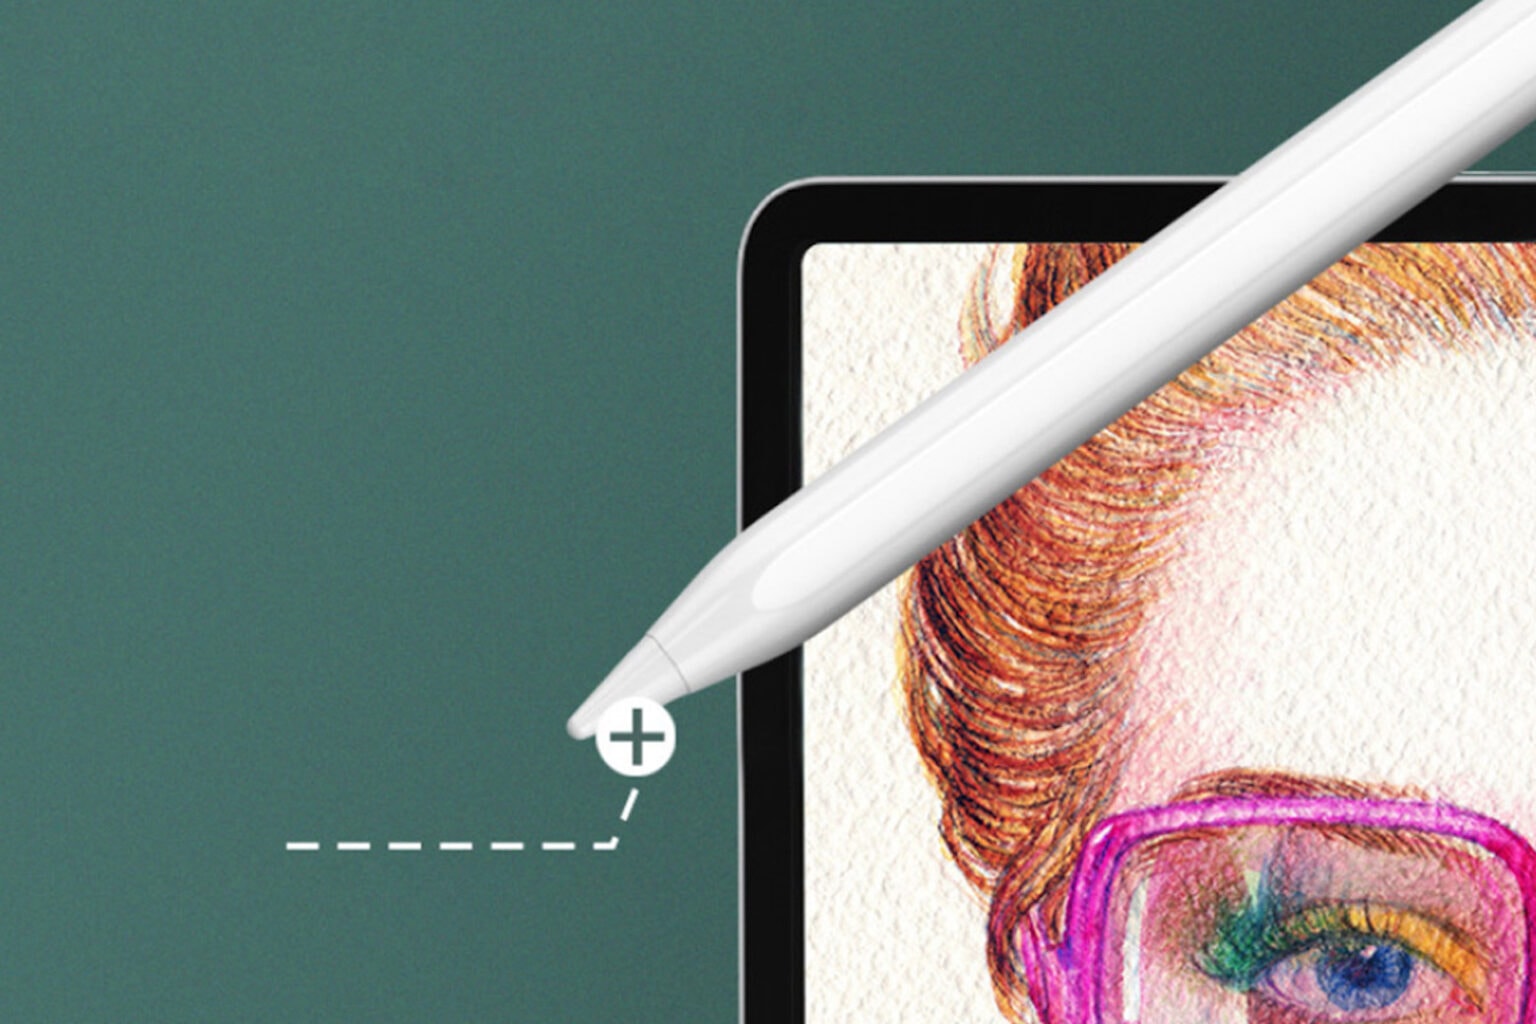 Boost your creativity with this five-star Apple Pencil alternative, more than half off now.